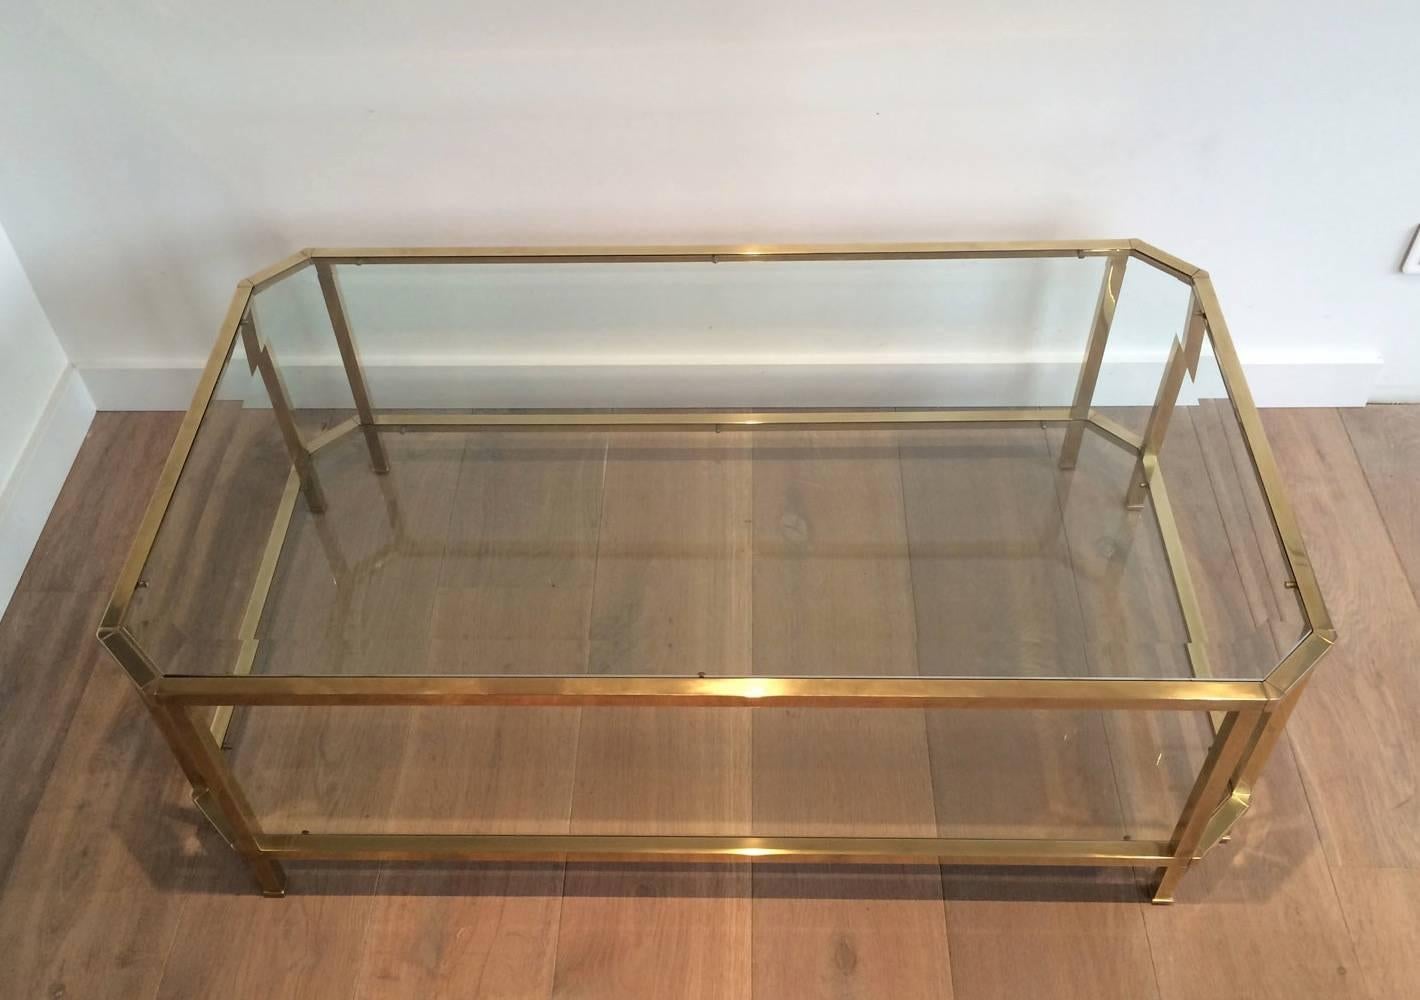 Handsome octagonal brass coffee table with beveled glass, French, circa 1970


This item is currently in France, please allow 4 to 6 weeks delivery to New York. Shipping costs from France to our warehouse in New York included in price.